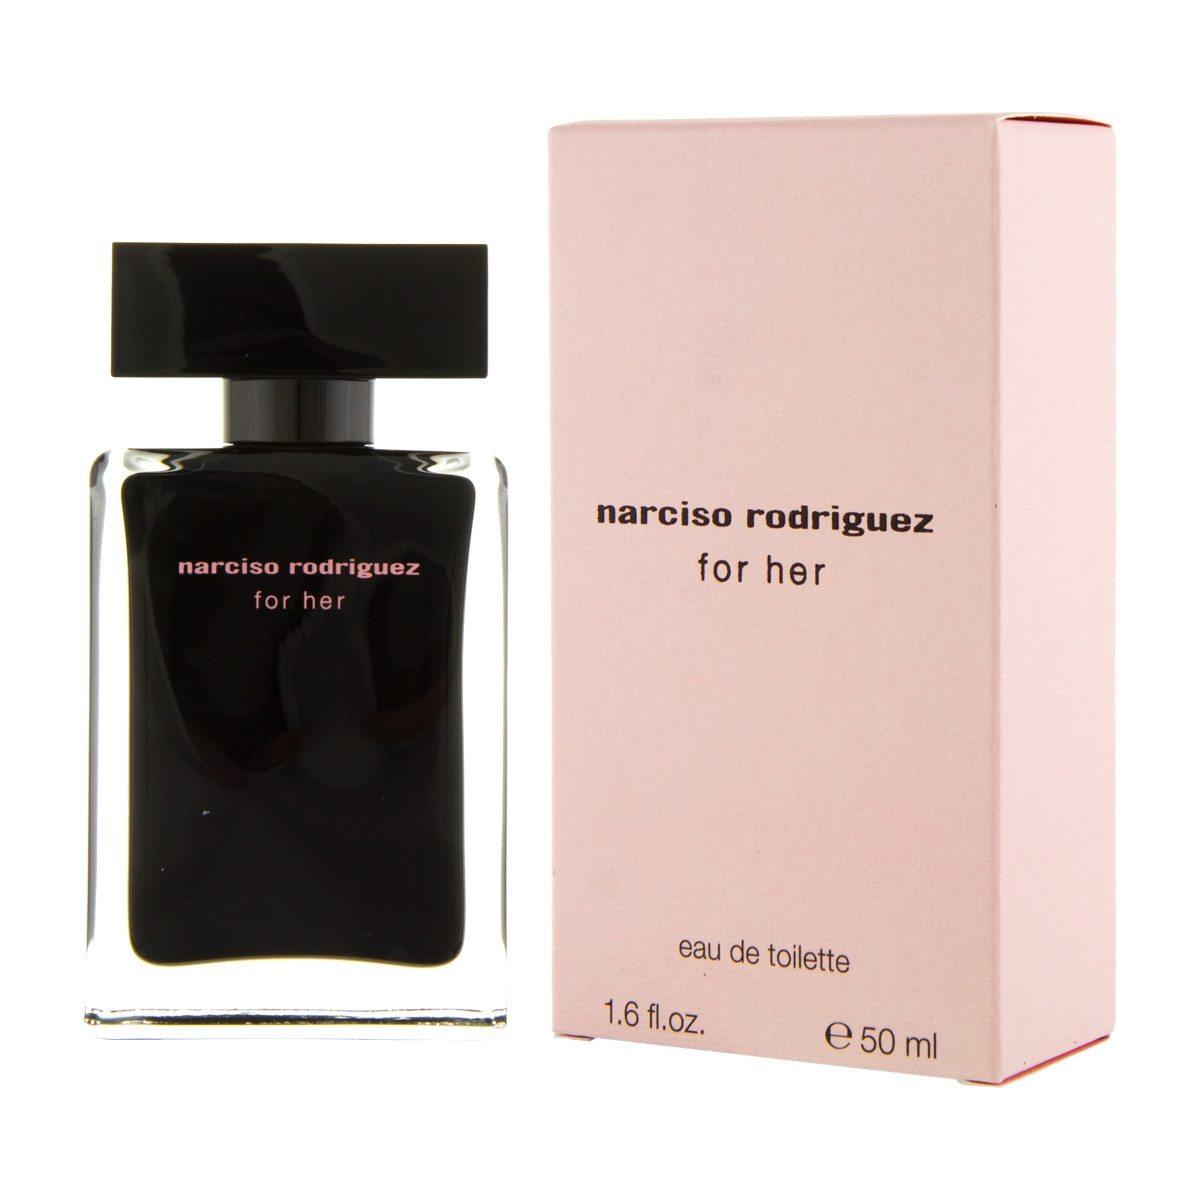 For her 50 ml